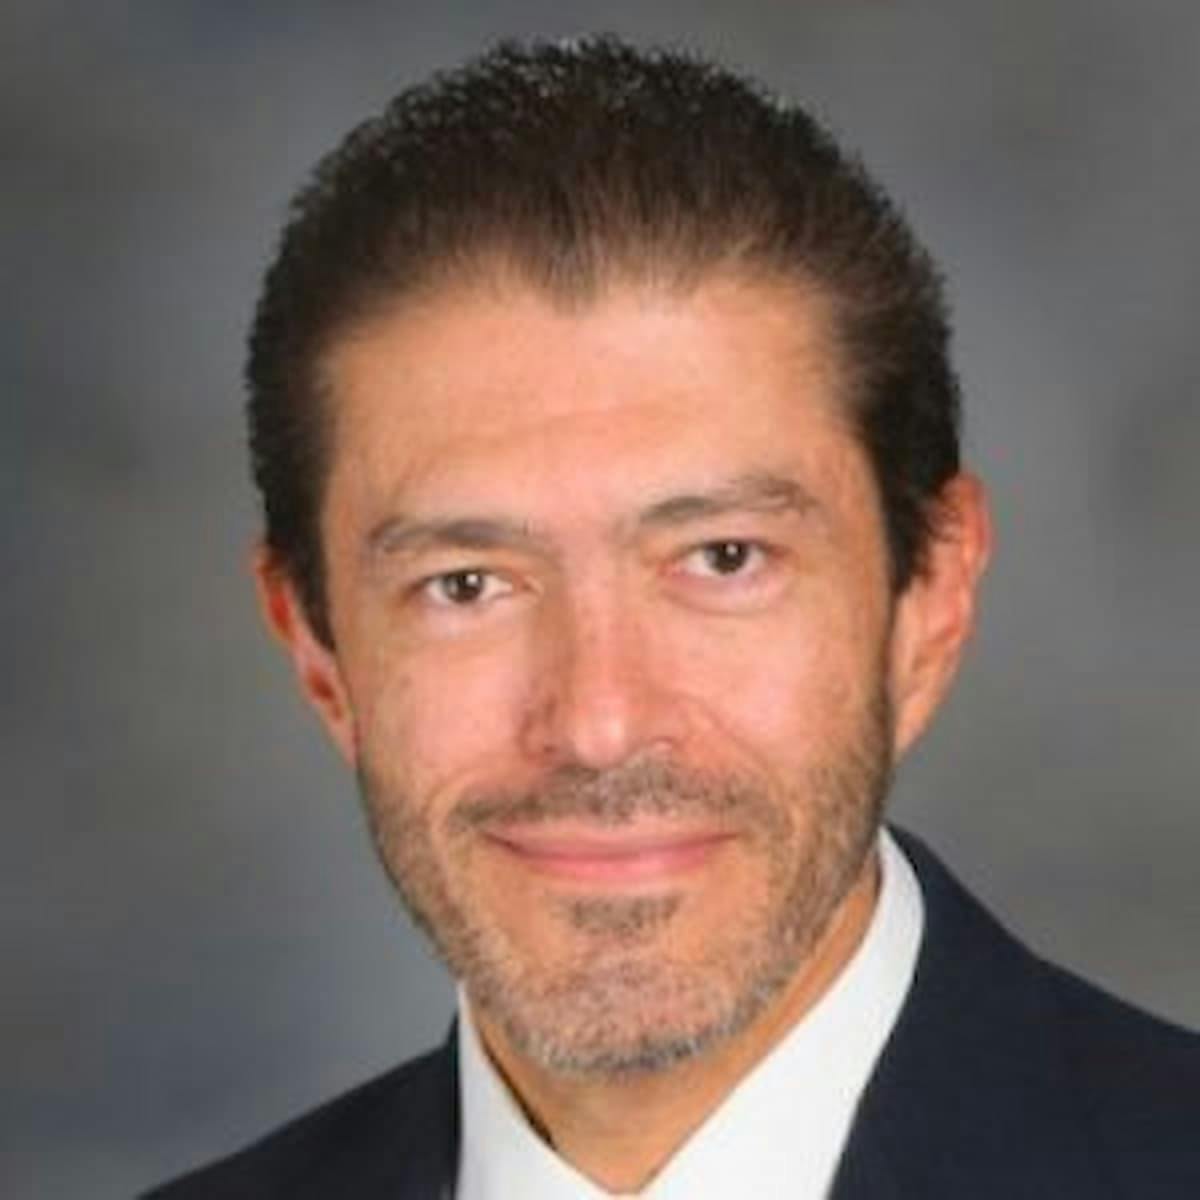 Jorge Cortes, MD, director of the Georgia Cancer Center at Augusta University